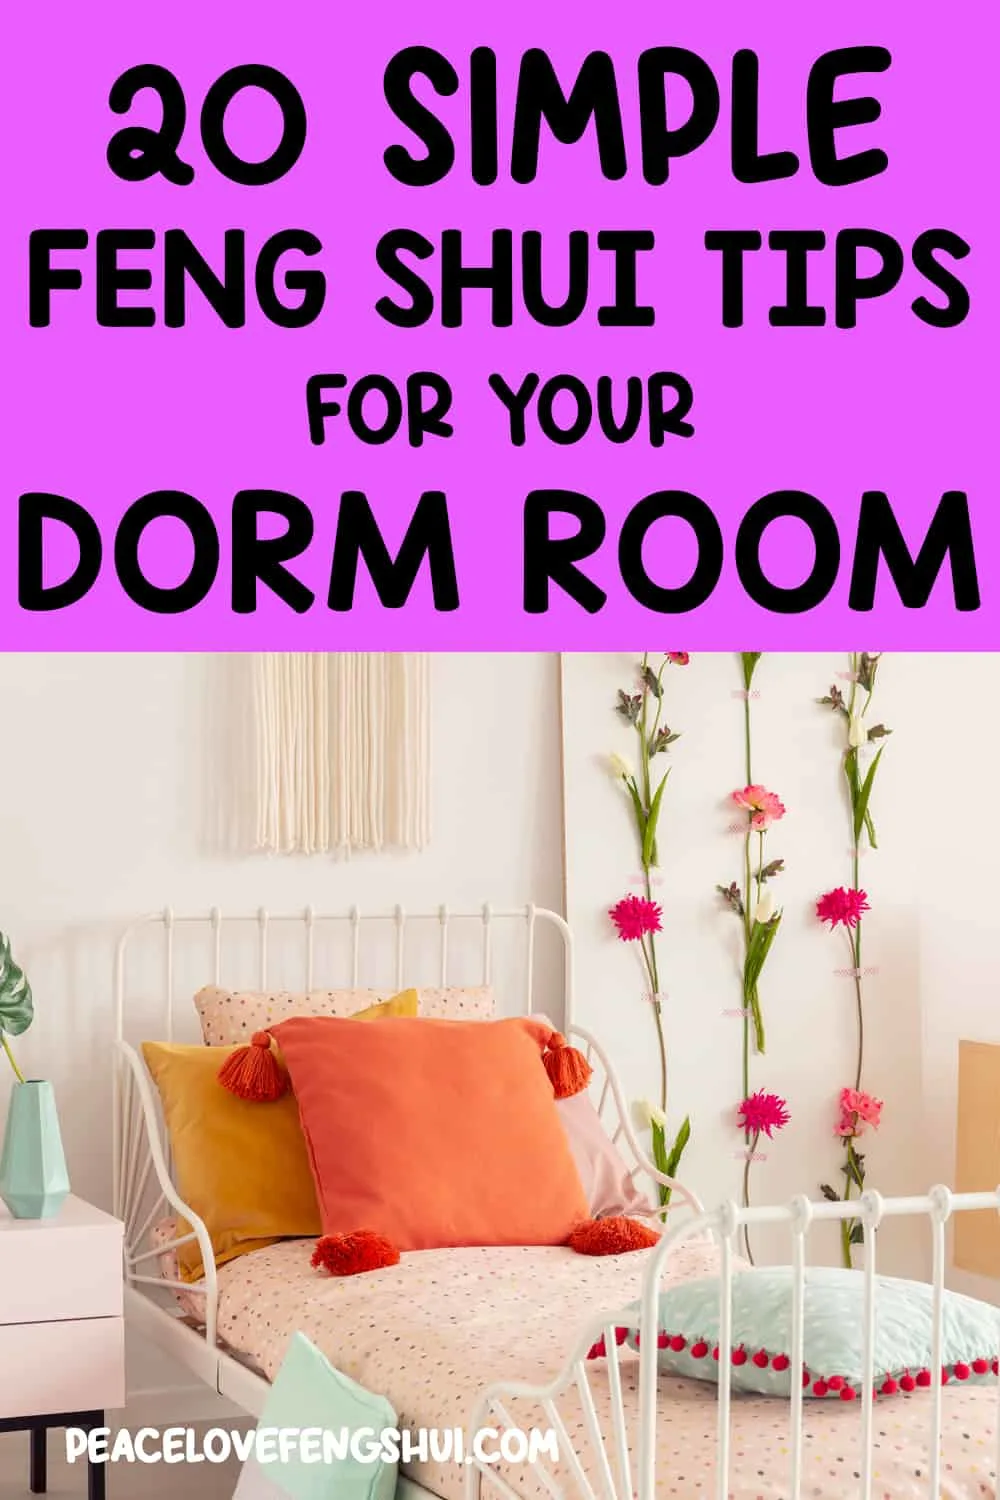 20 simple feng shui tips for your dorm room